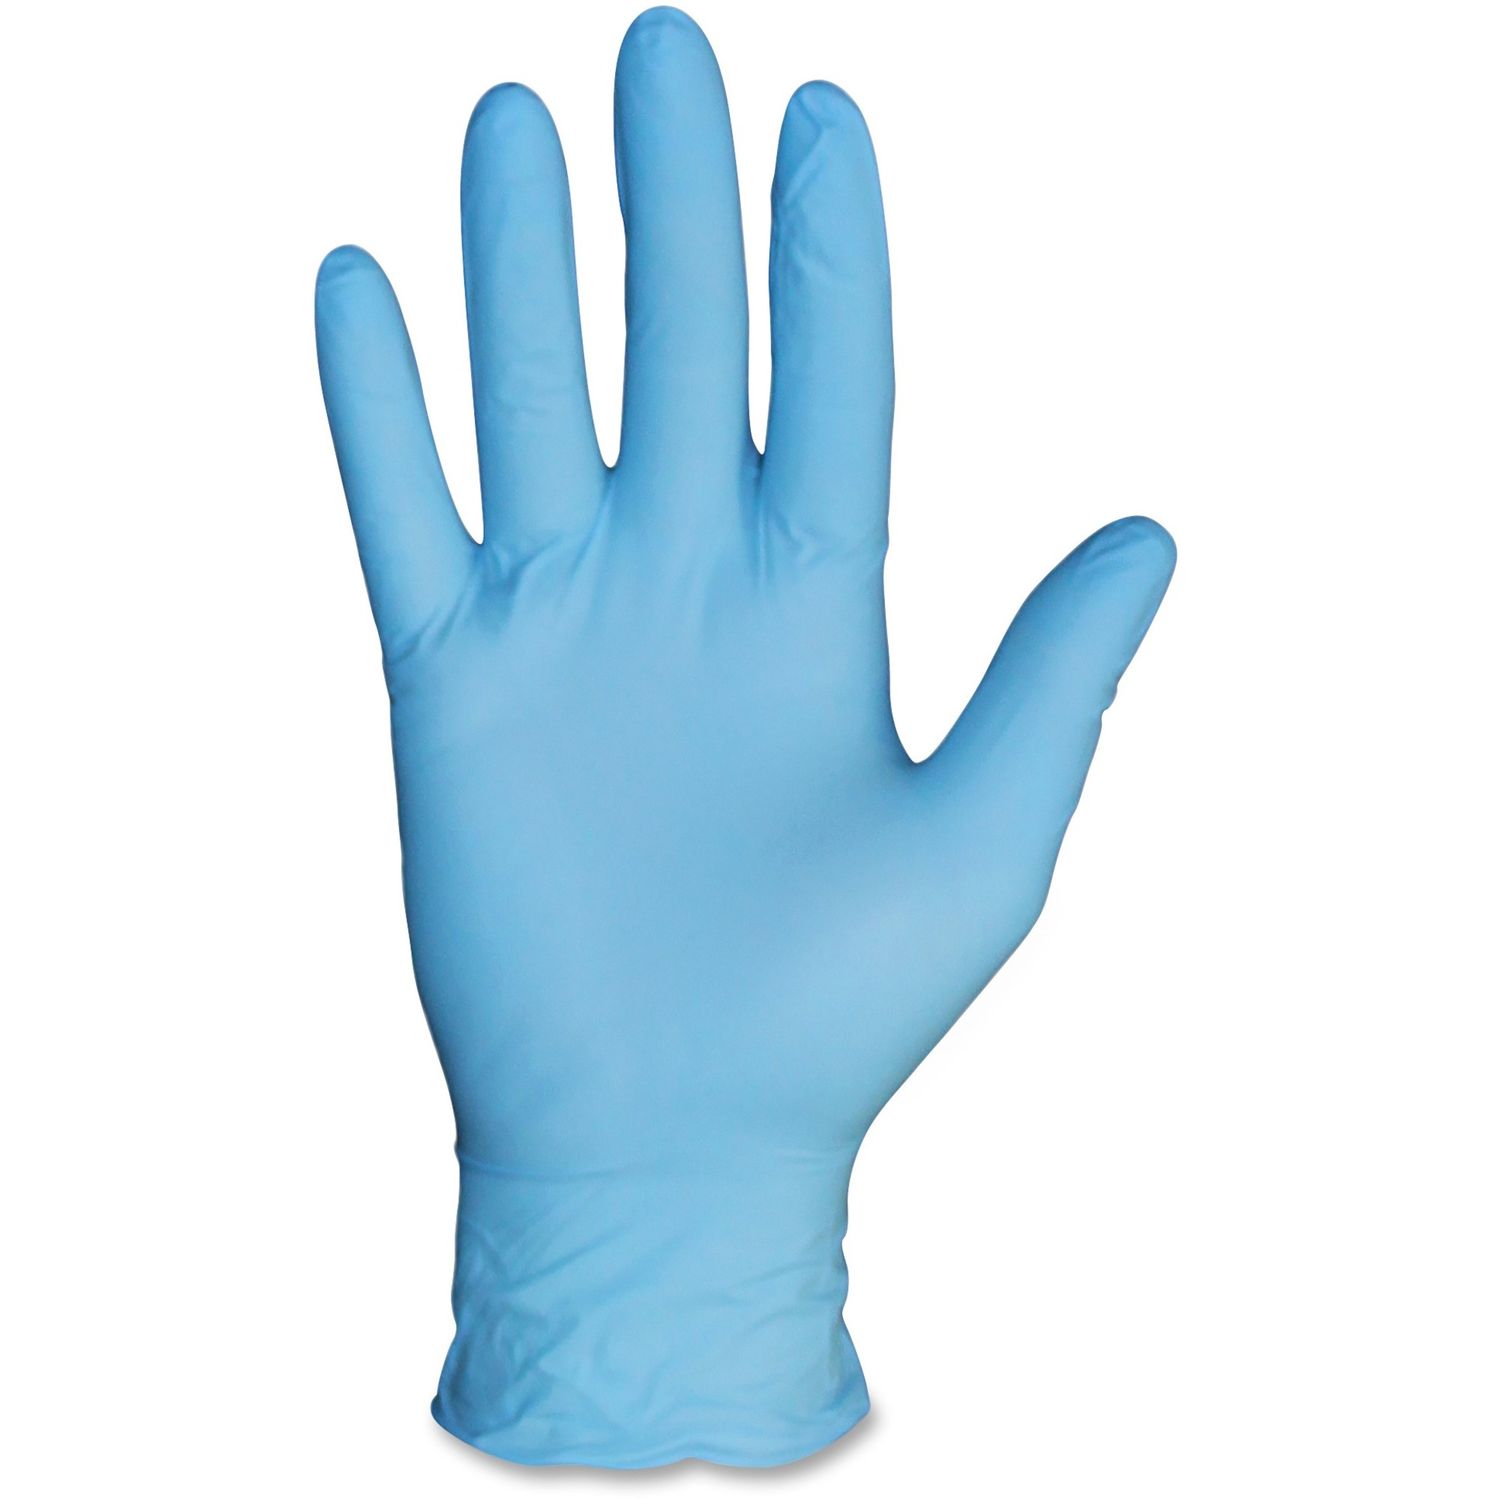 General-purpose Disposable Nitrile Gloves Chemical Protection, Large Size, Nitrile, Blue, Disposable, Powdered, Textured Grip, Beaded Cuff, Puncture Resistant, Ambidextrous